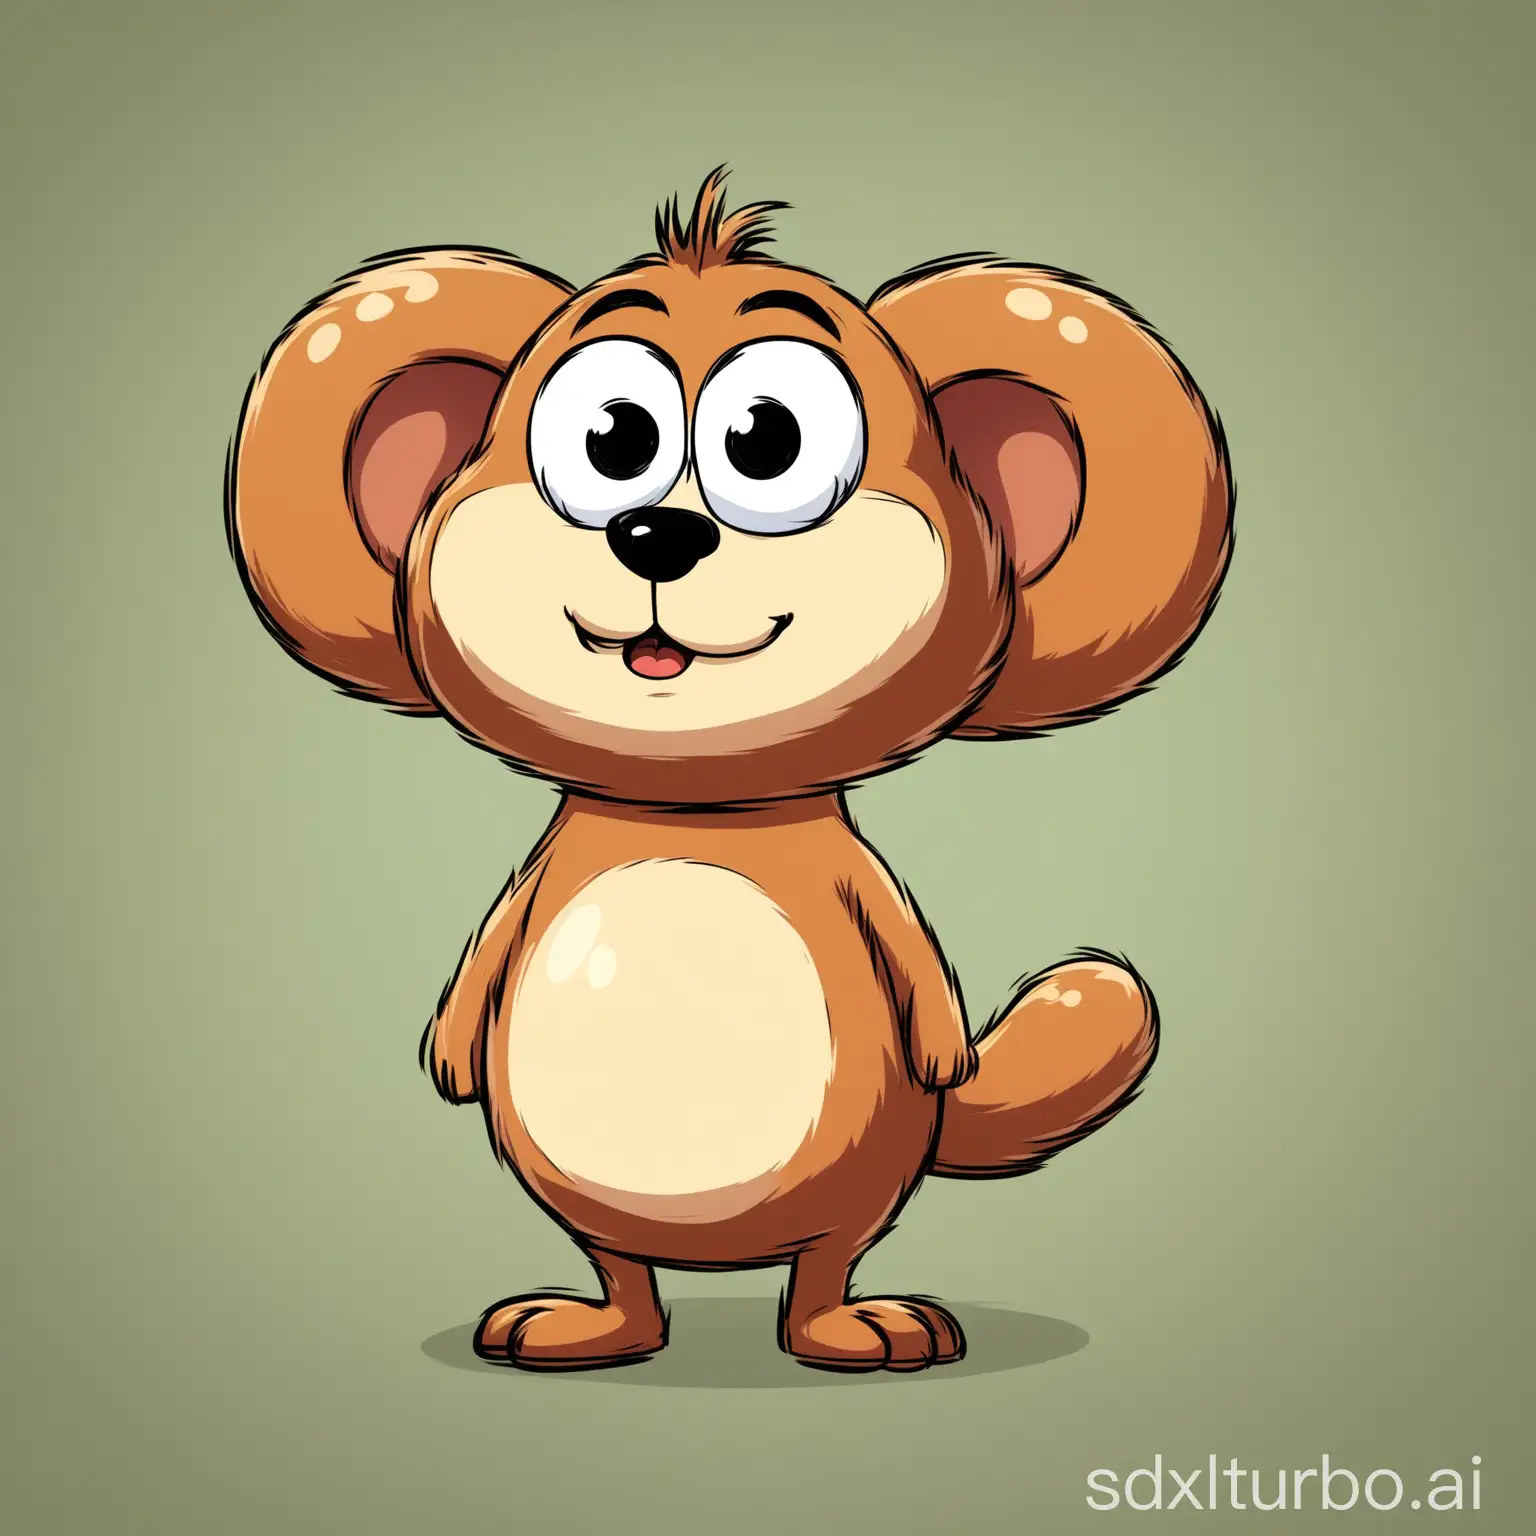 a cartoon animal, a character suitable for comedic roles, even more funny